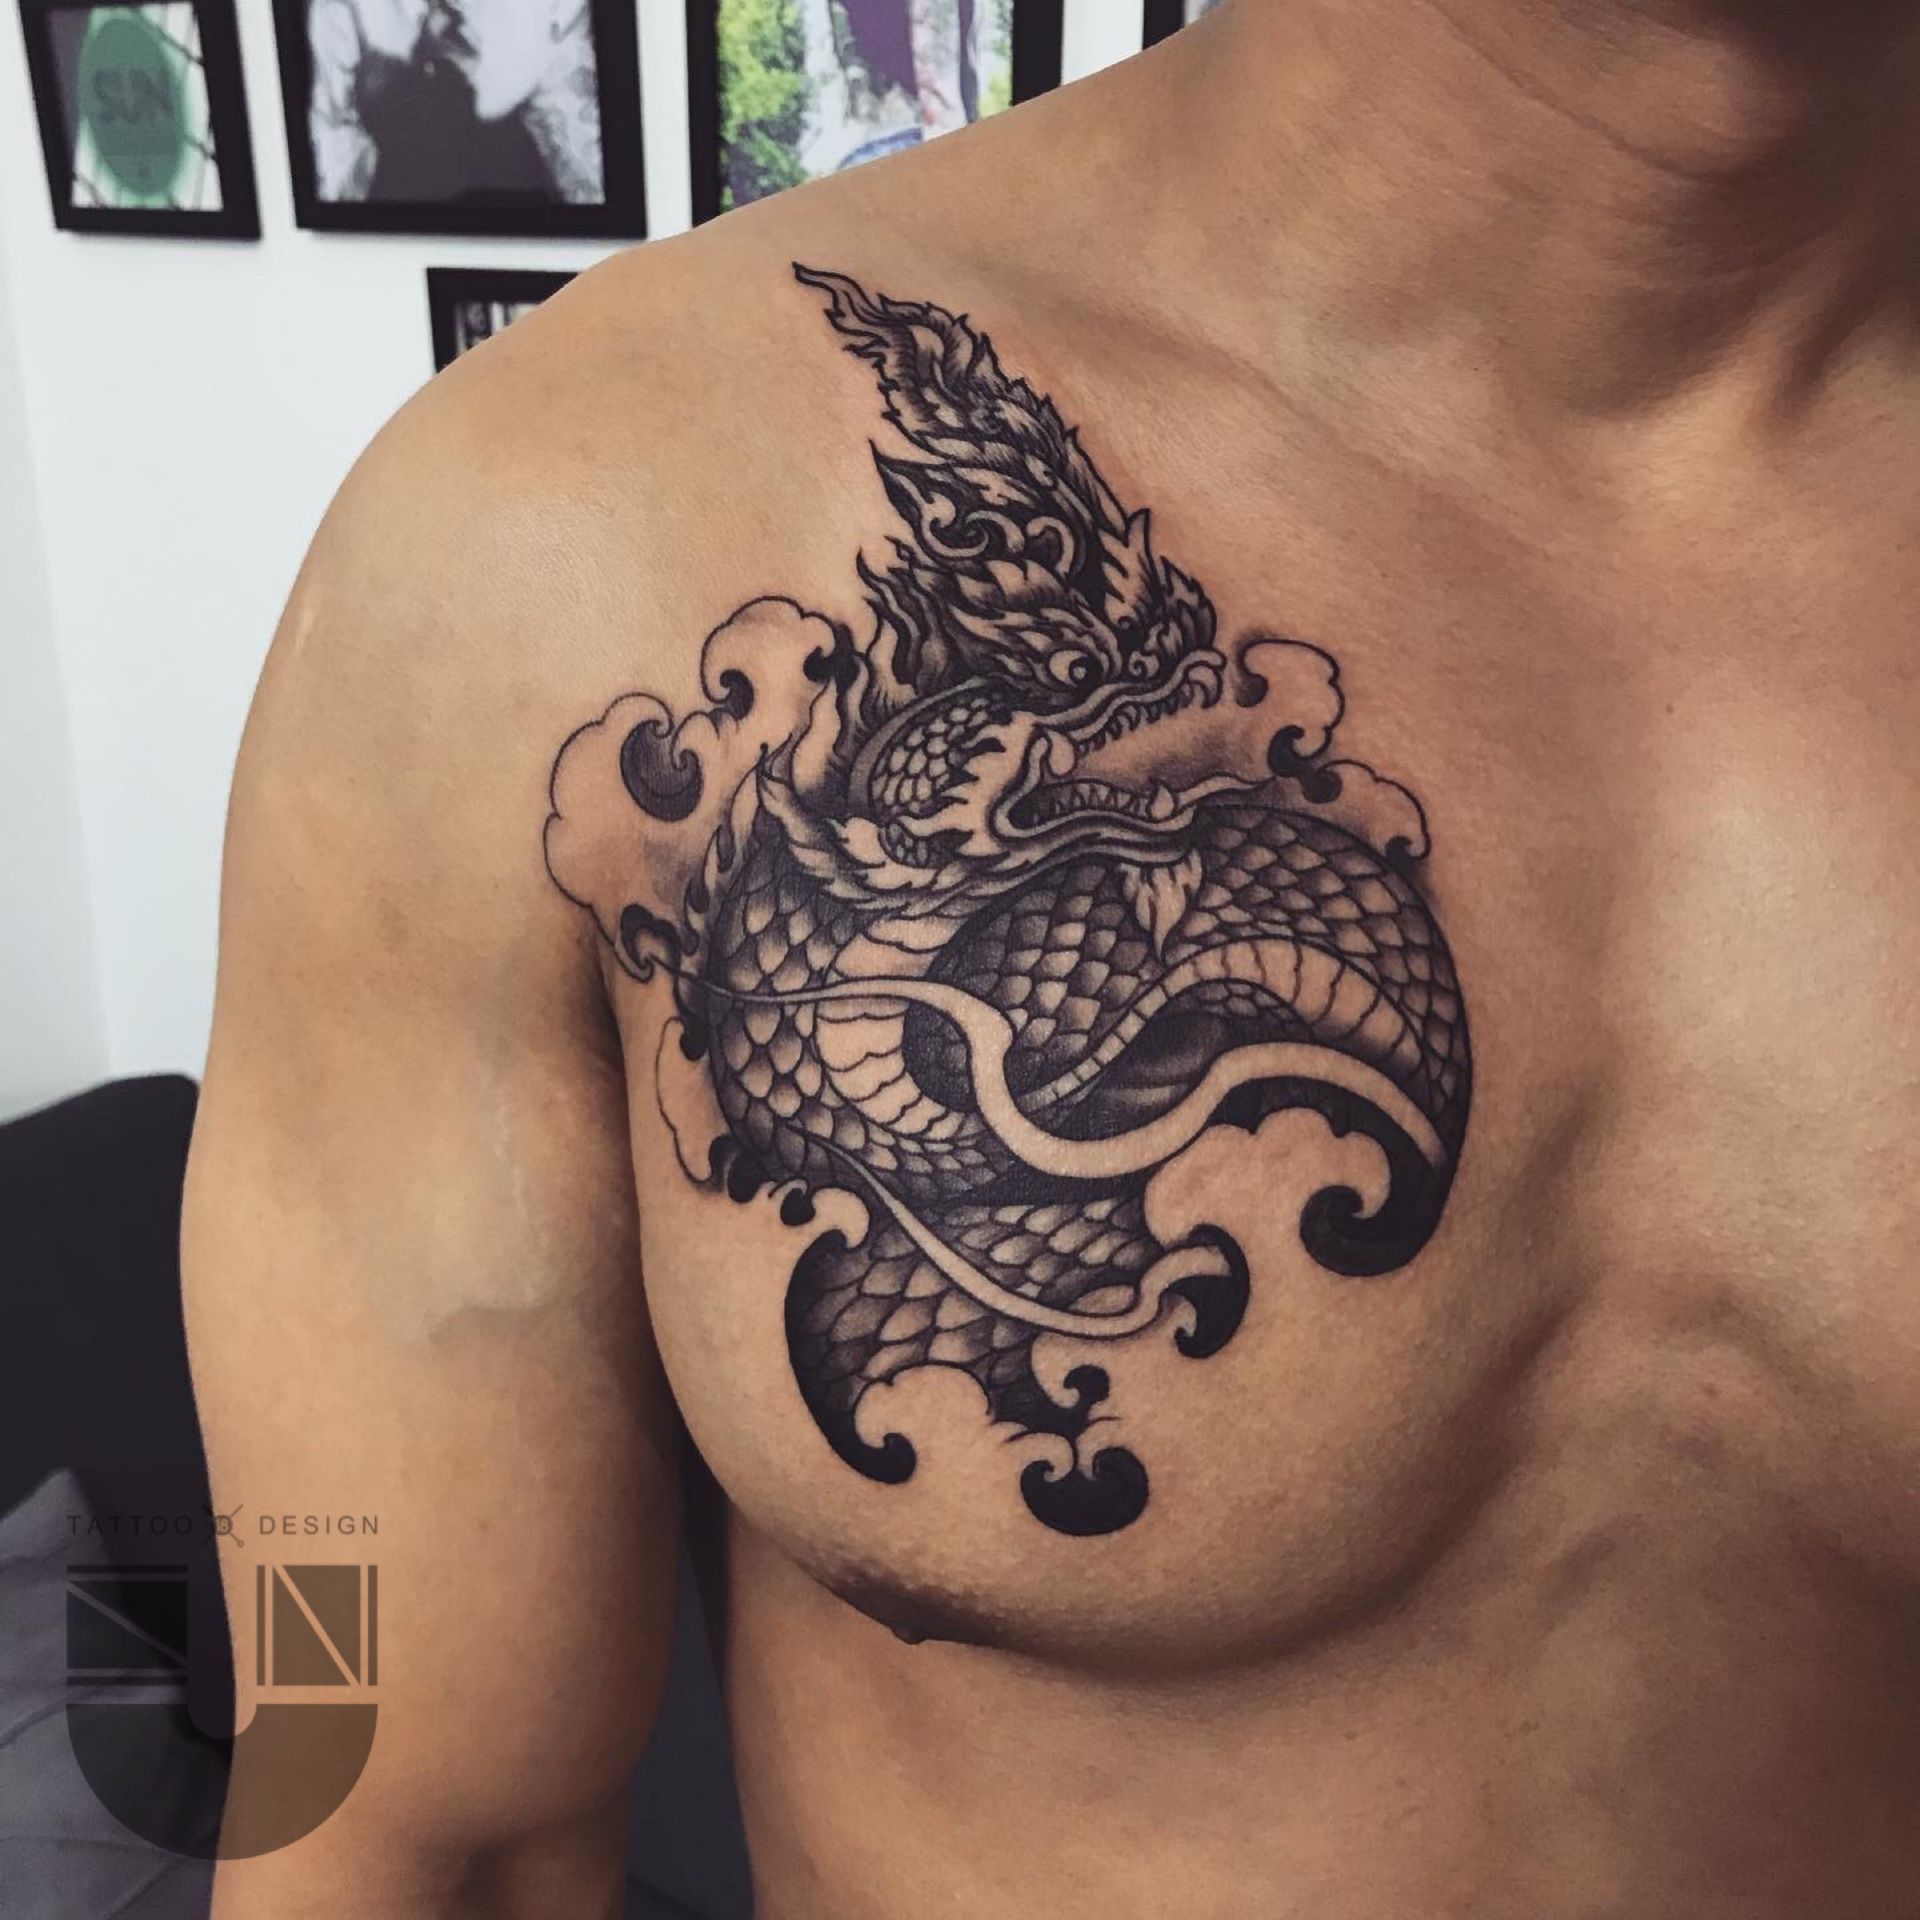 Thai Dragon Tattoo Images Browse 1183 Stock Photos  Vectors Free  Download with Trial  Shutterstock